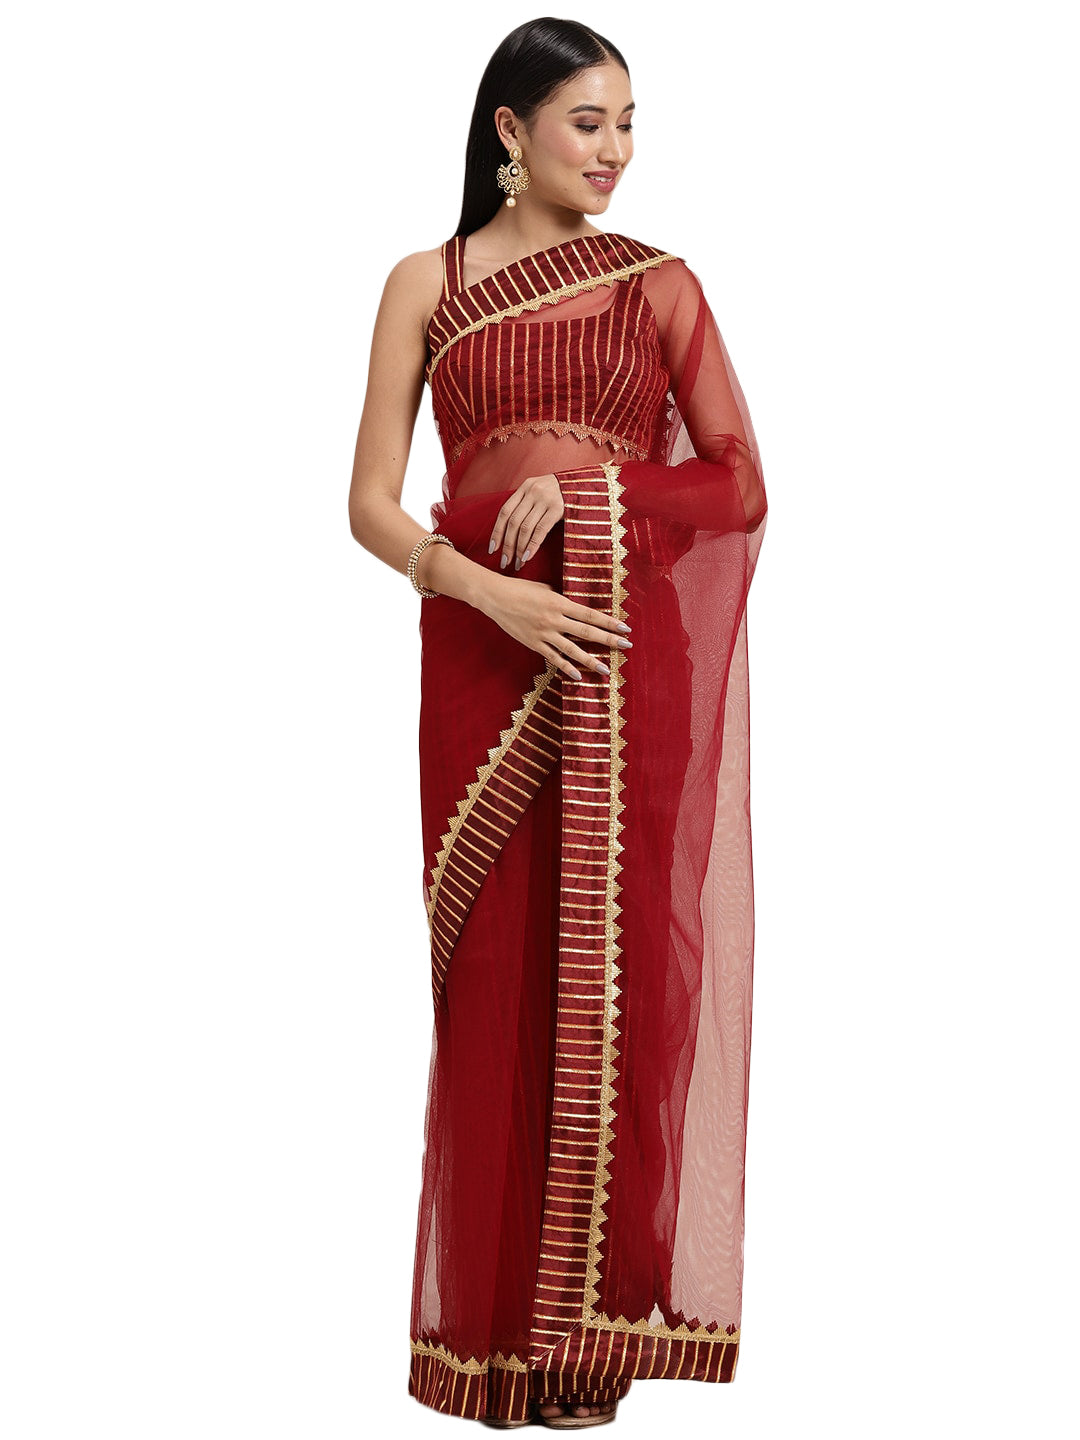 Net Embroidery Red Saree